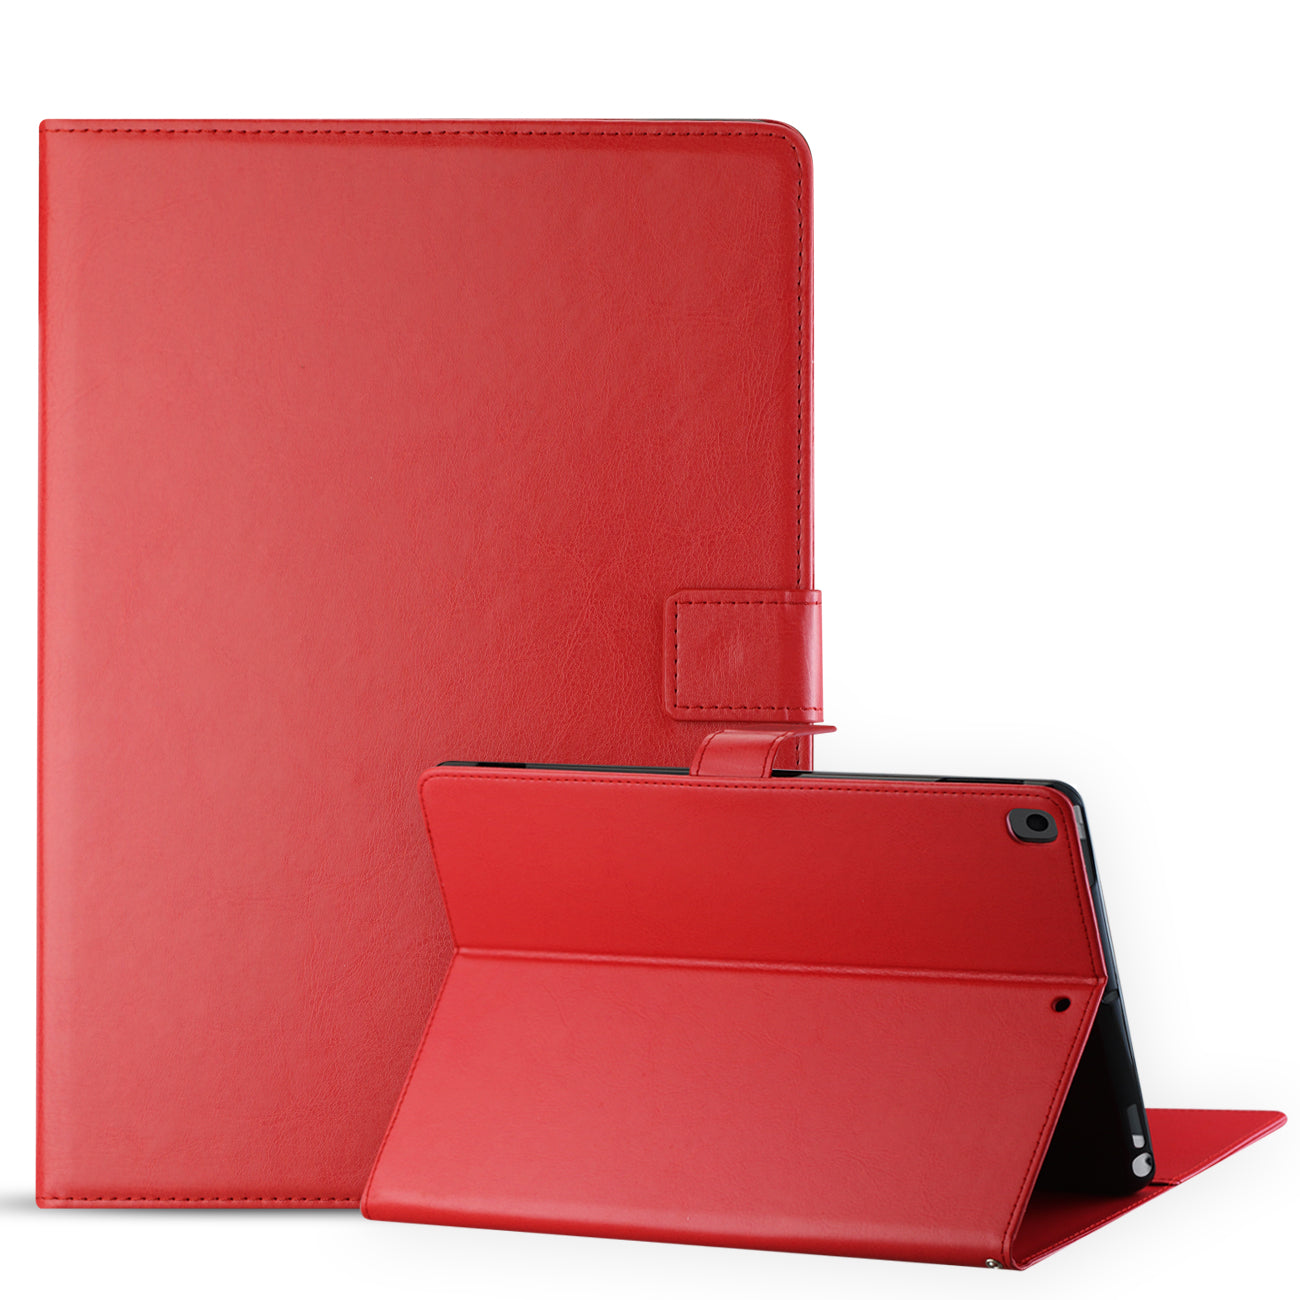 Reiko Leather Folio Cover Protective Case for 10.2" iPad 8 2020 or iPad 7 2019 In Red